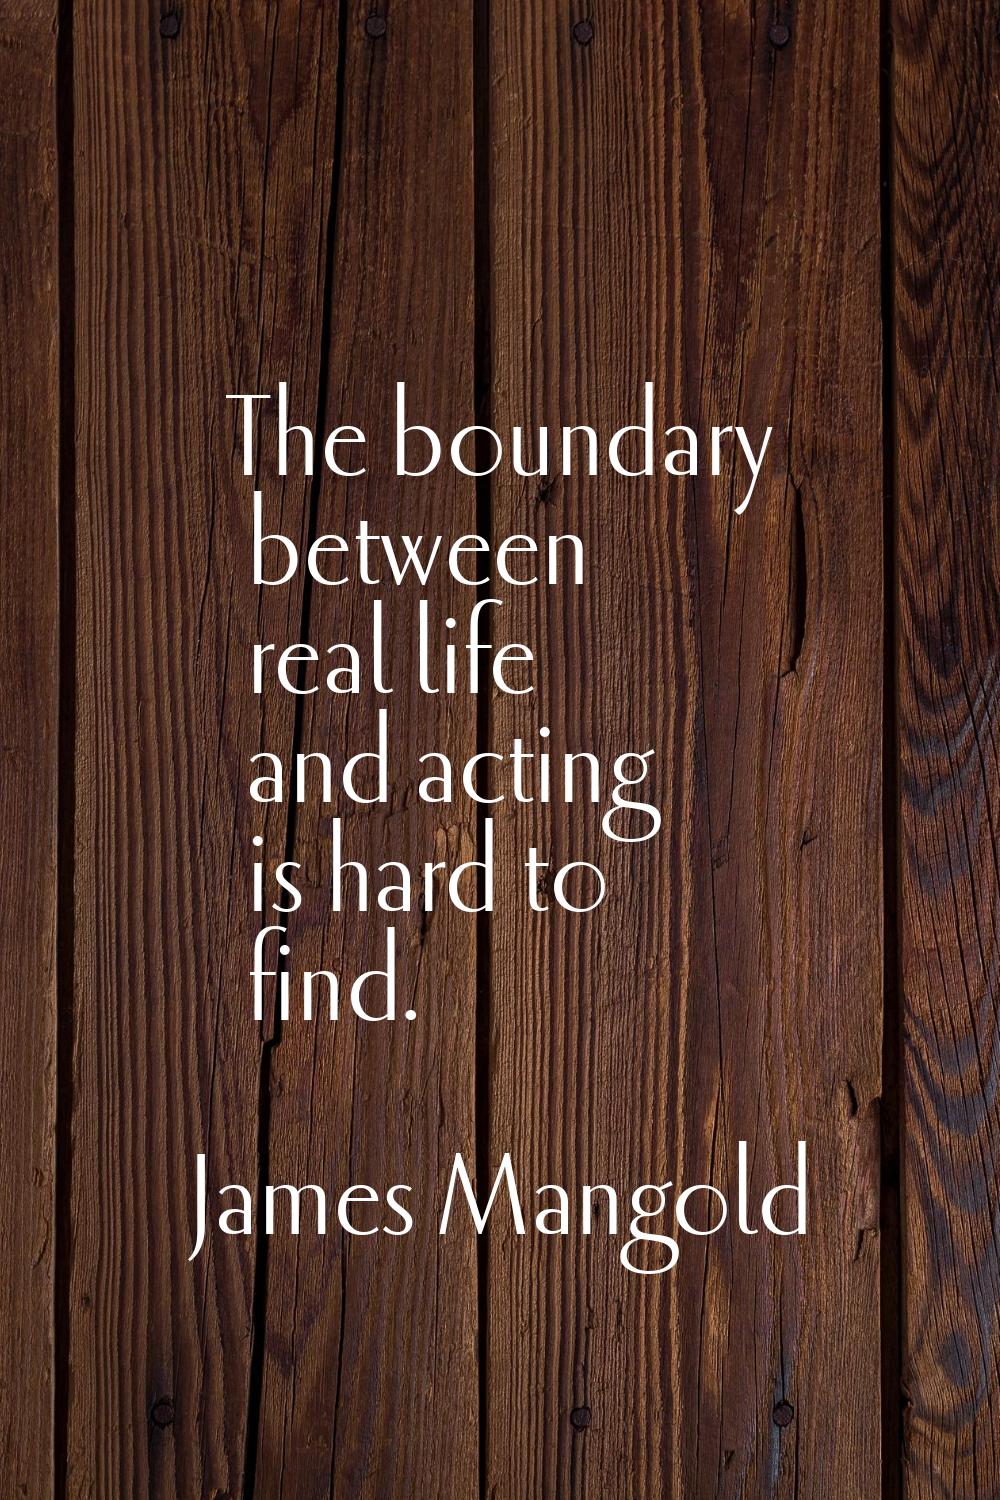 The boundary between real life and acting is hard to find.